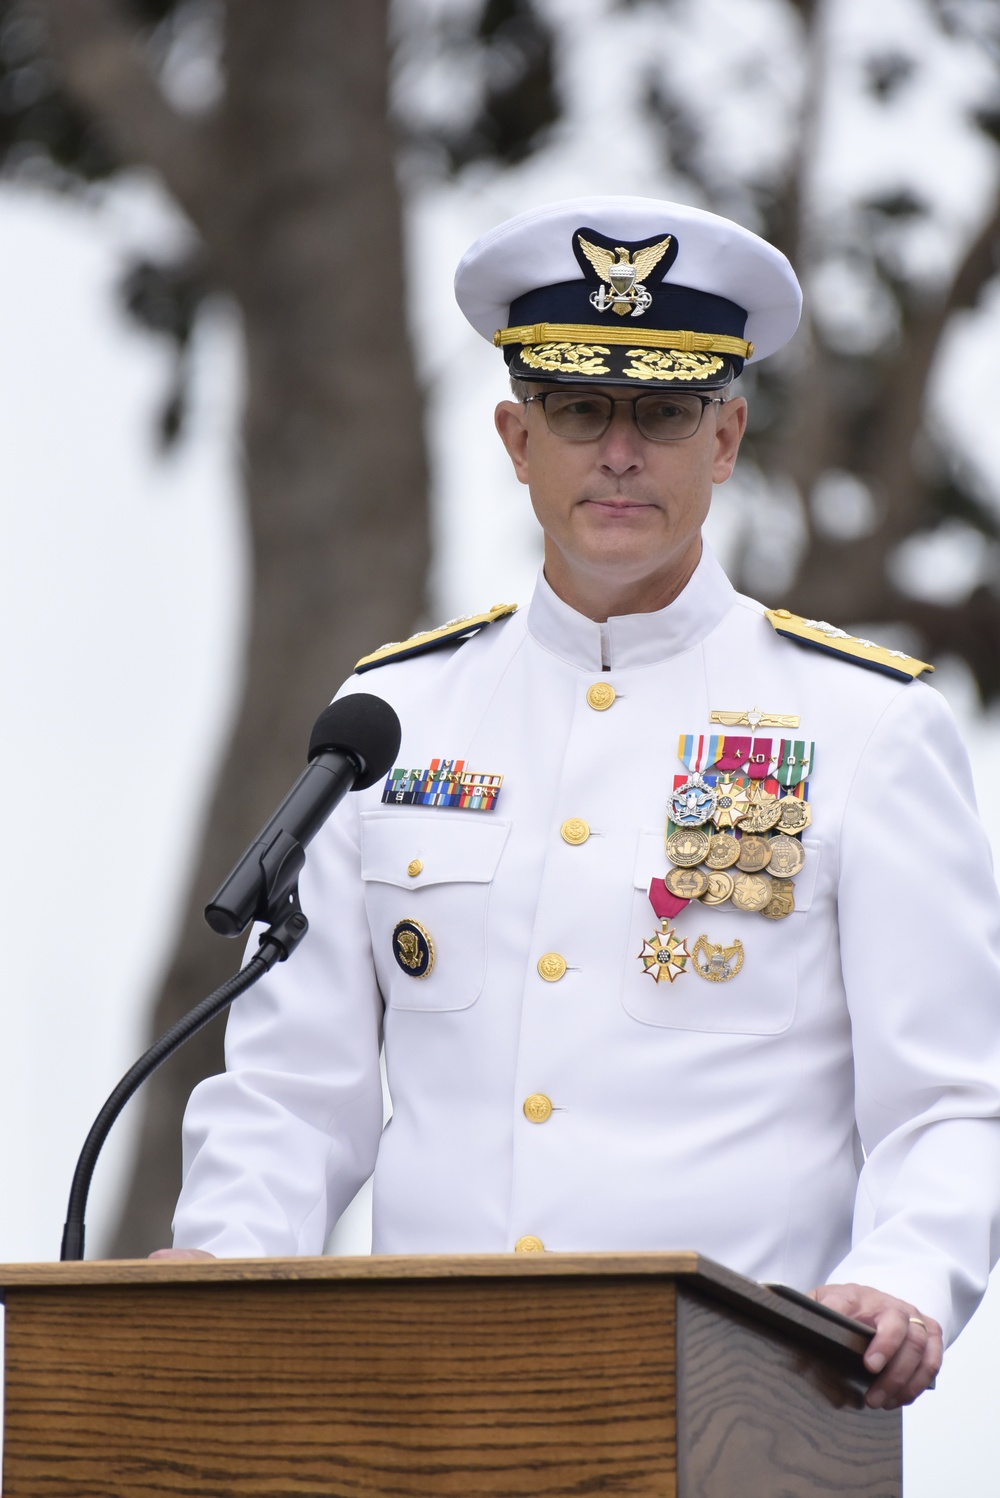 Coast Guard receives new district commander for California operations